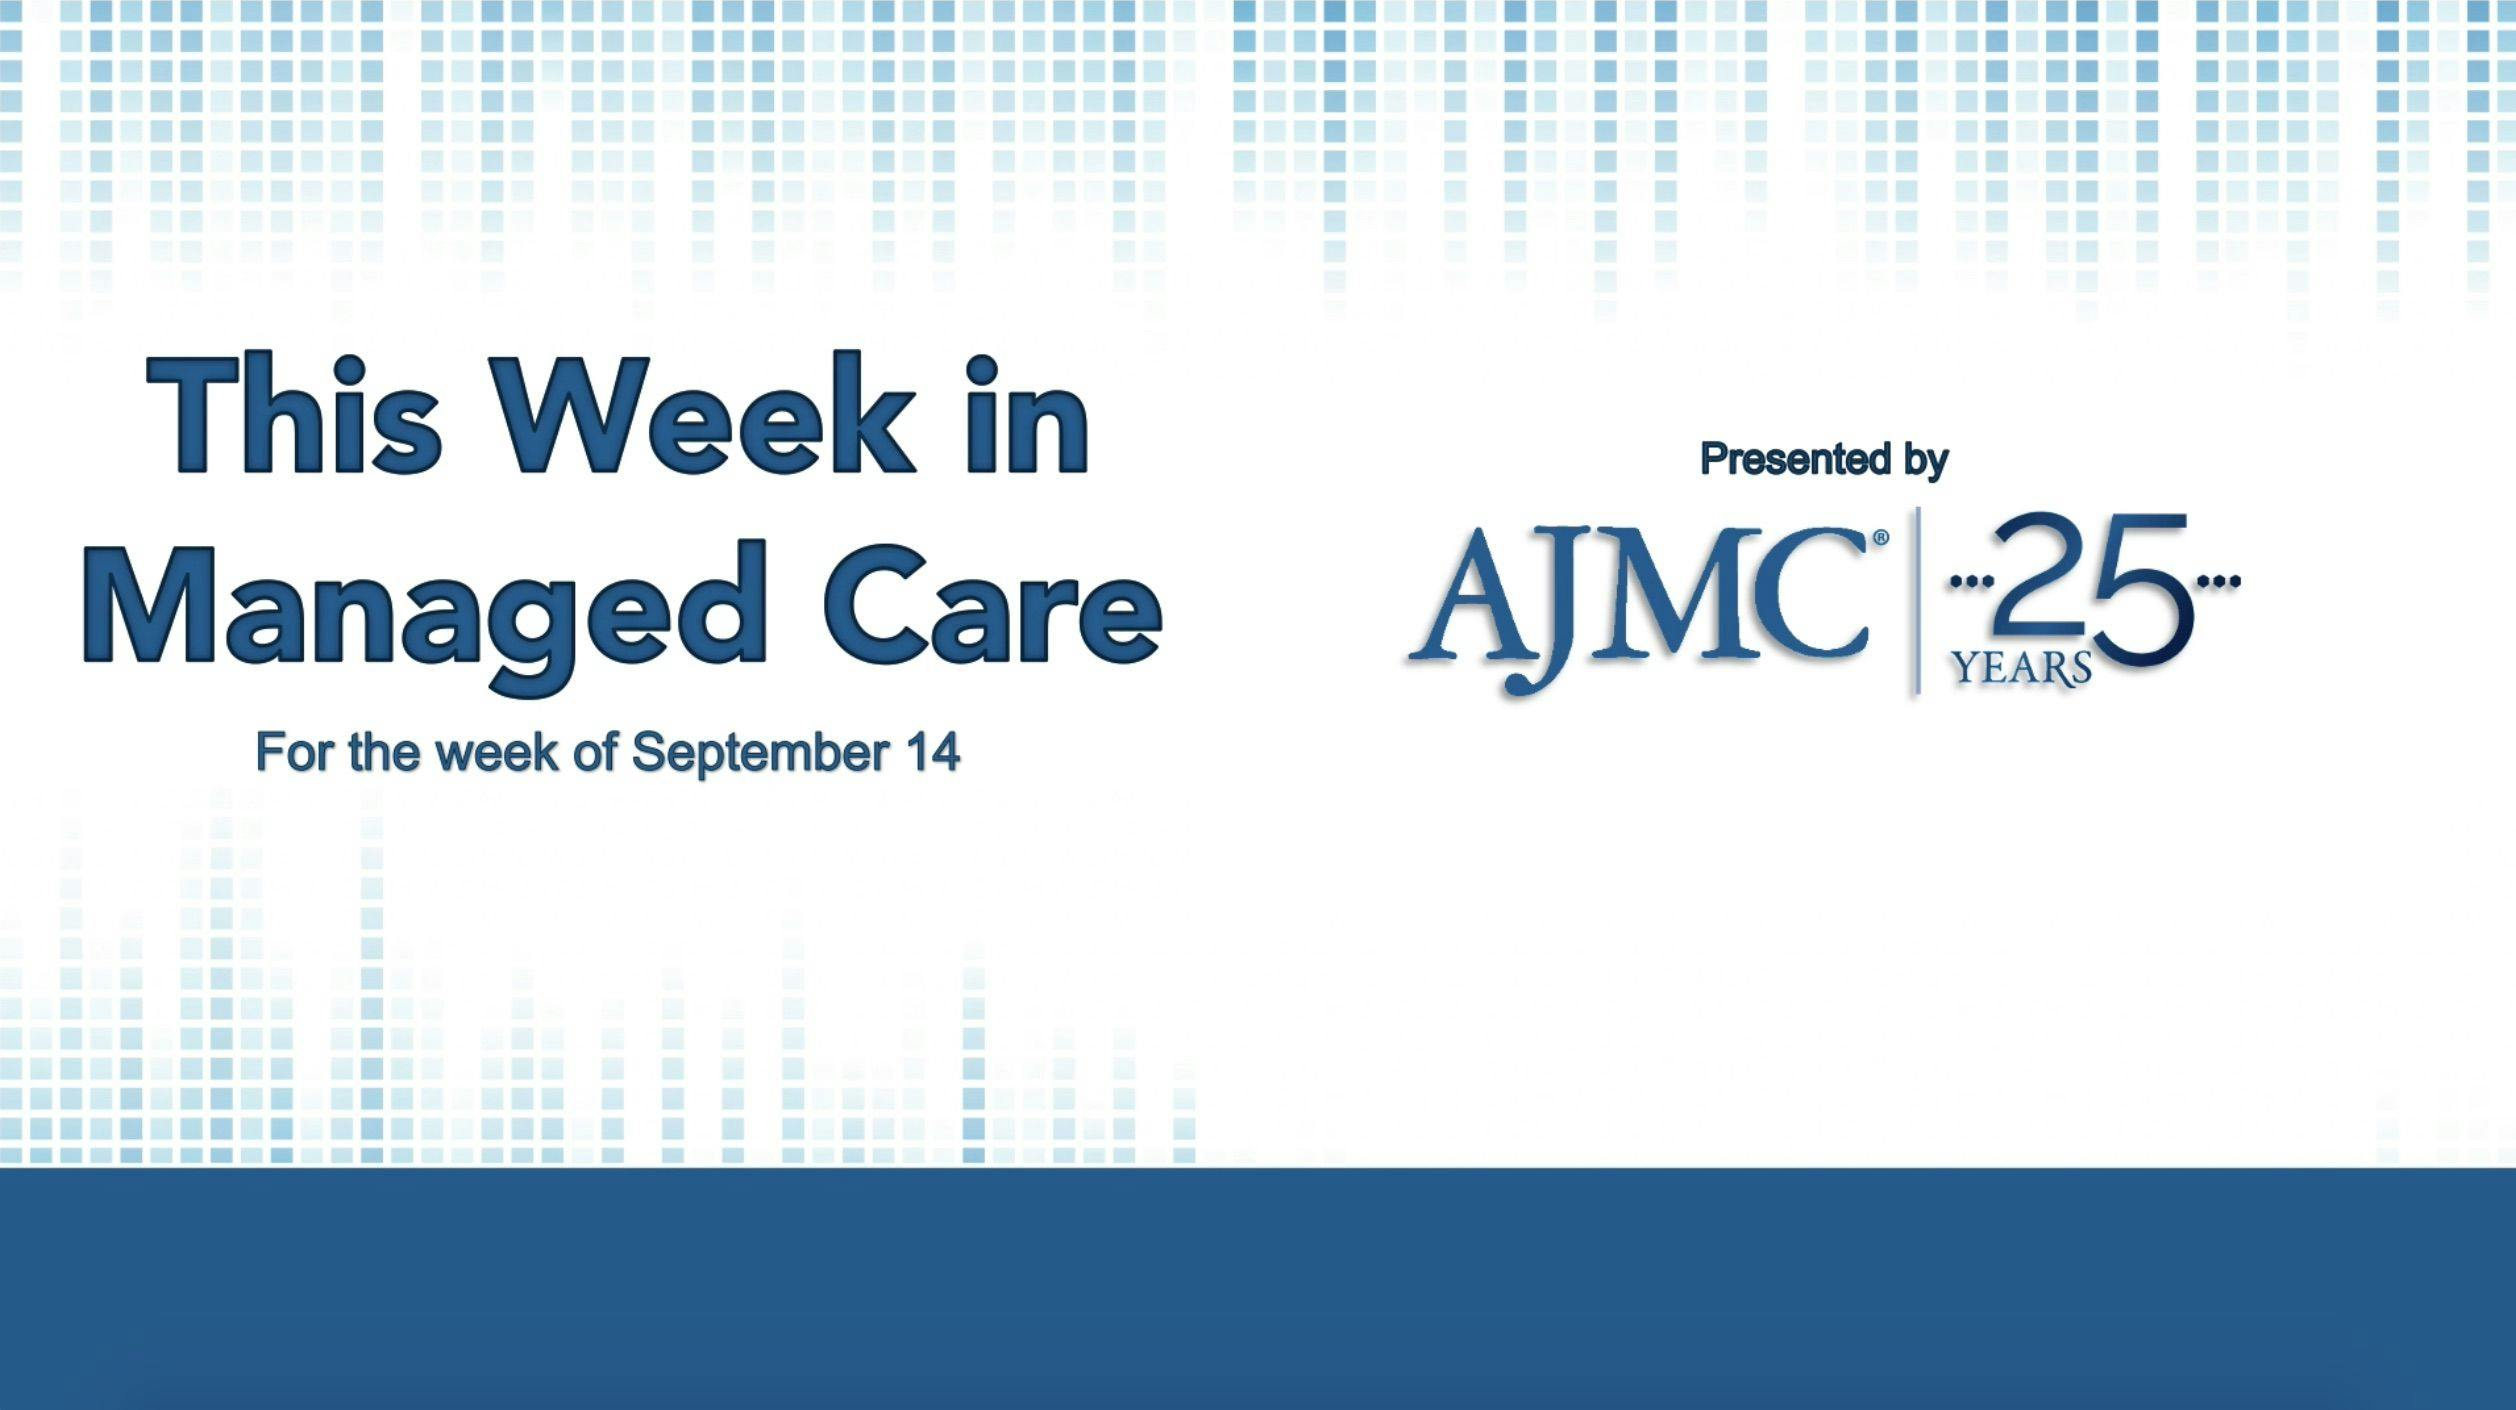 This Week in Managed Care: September 18, 2020